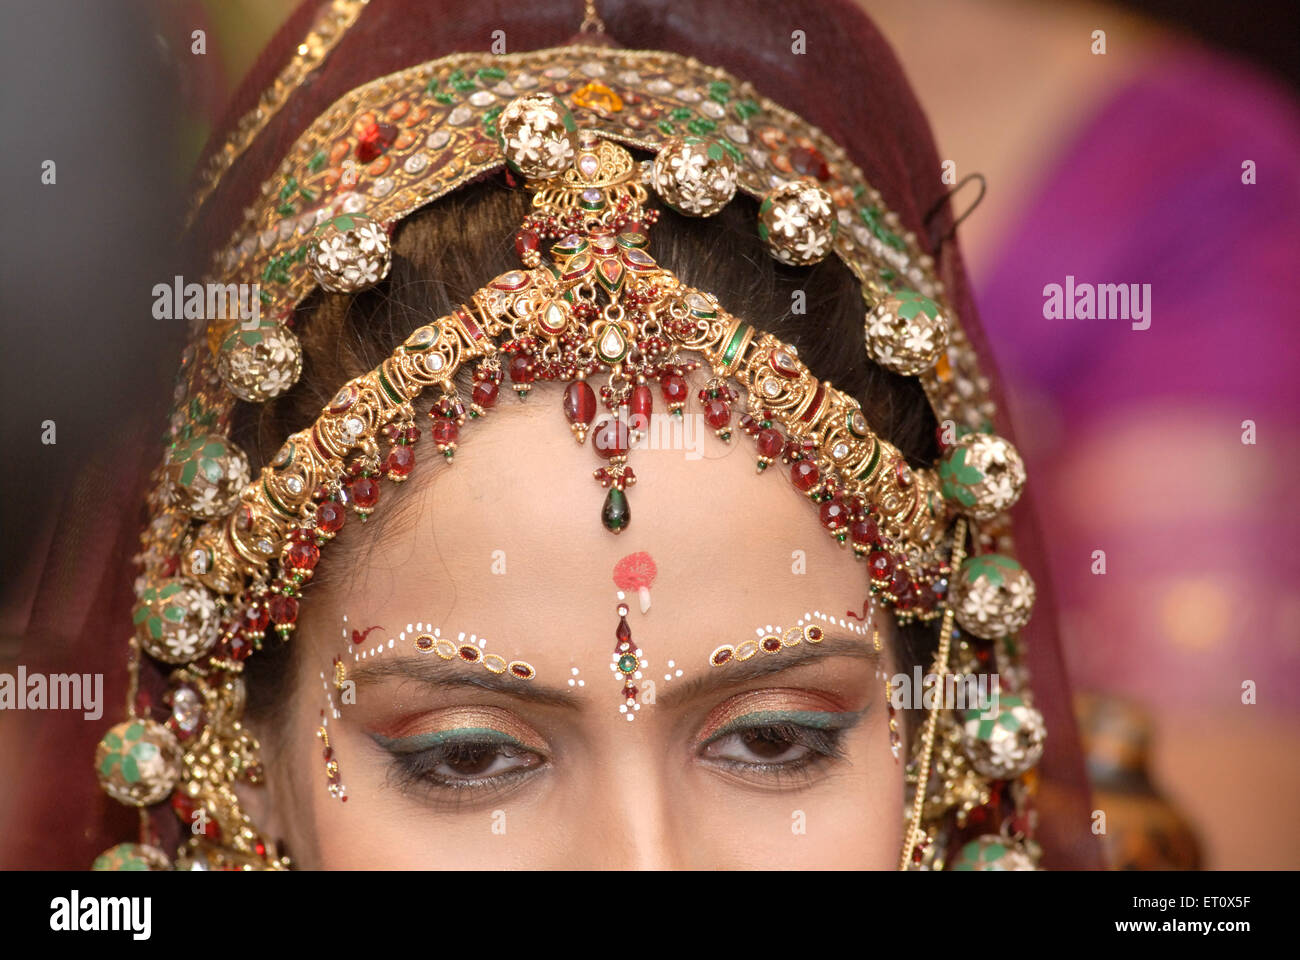 bride marriage makeup for wedding, India MR Stock Photo